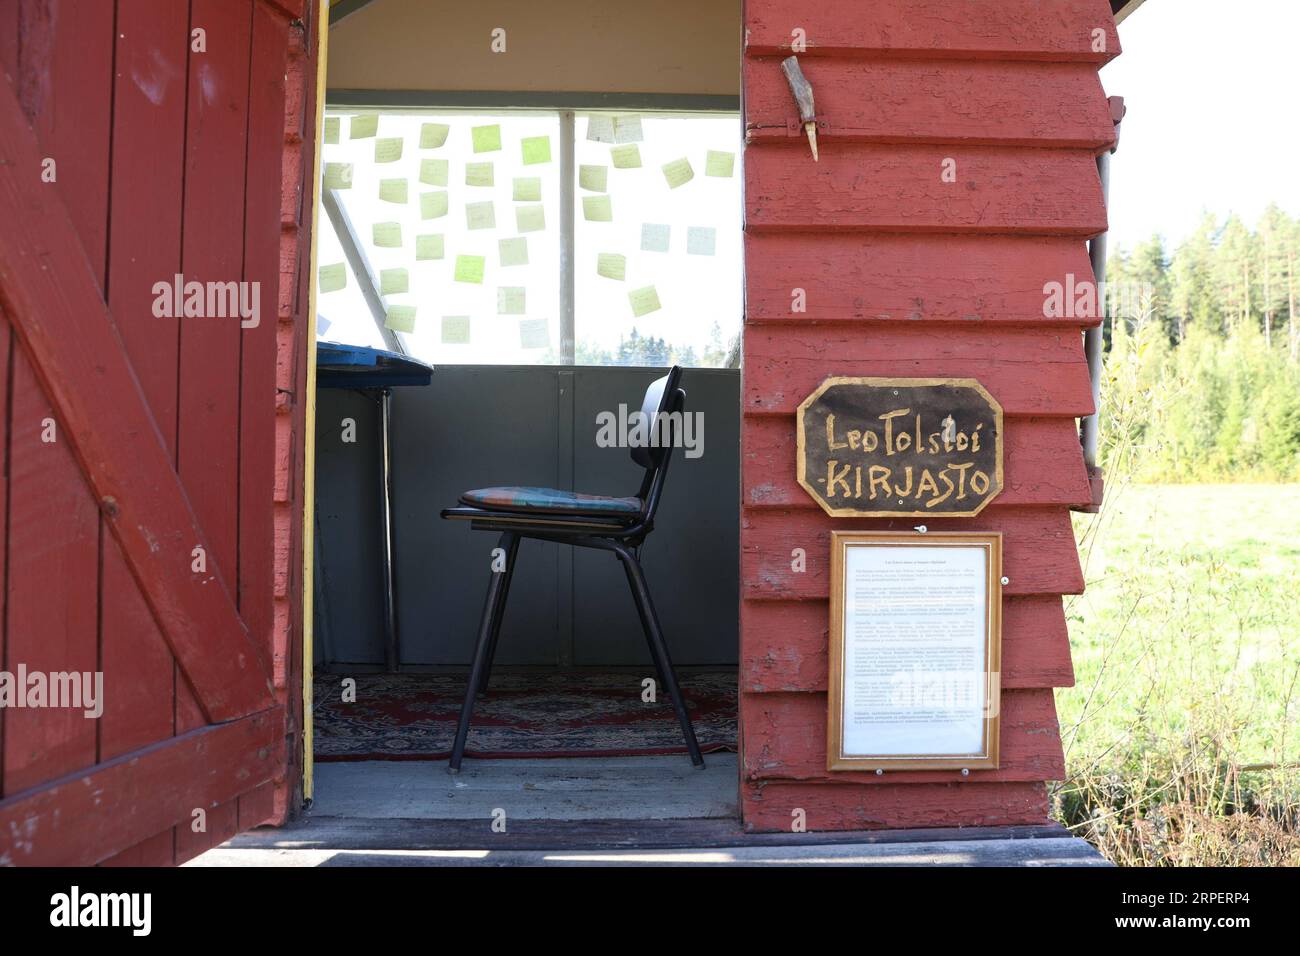 190903 -- HELSINKI, Sept. 3, 2019 -- Photo taken on Sept. 1, 2019 shows a tiny museum transformed from a milk platform in Velaatta village near Tampere, southern Finland. The museum used to be a milk platform where Finnish people would hand the full cans of milk and wait for lorries to collect them for the dairy. The museum, open to public free of charge from June 18 to Oct. 1 every year, stands for hard work and social change in Finland. A question about what happy life is has been raised during an ongoing activity in the museum and visitors wrote down their answers on notes and left them in Stock Photo